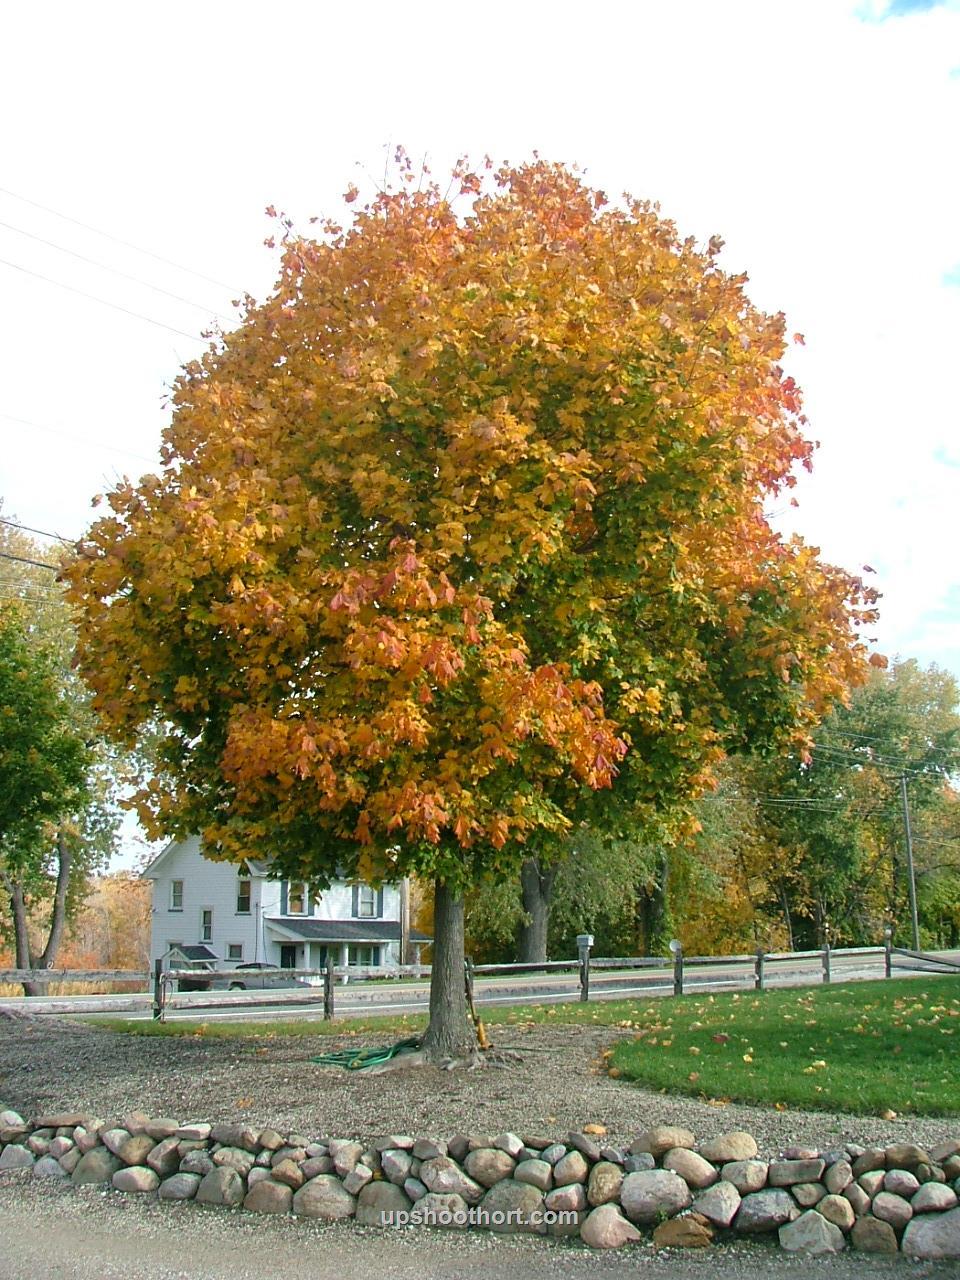 Research Shows: Some Norway Maple Cultivars Are Not Invasive... Of the many different cultivars of Acer platanoides, research indicates that there are some that are less invasive.